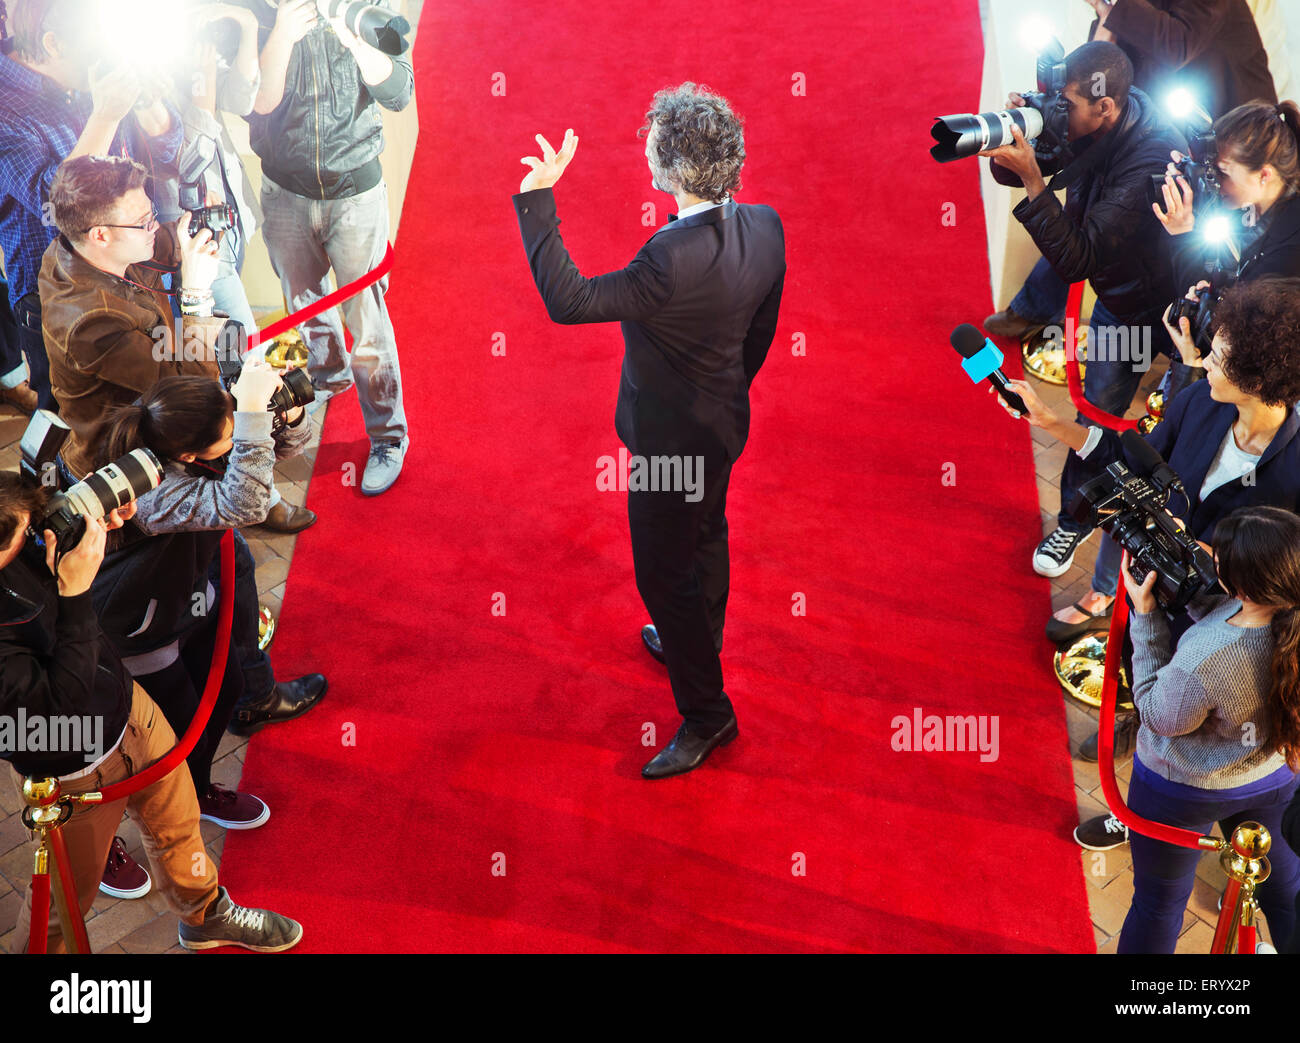 Celebrity arriving at red carpet event and waving at photographing paparazzi Stock Photo